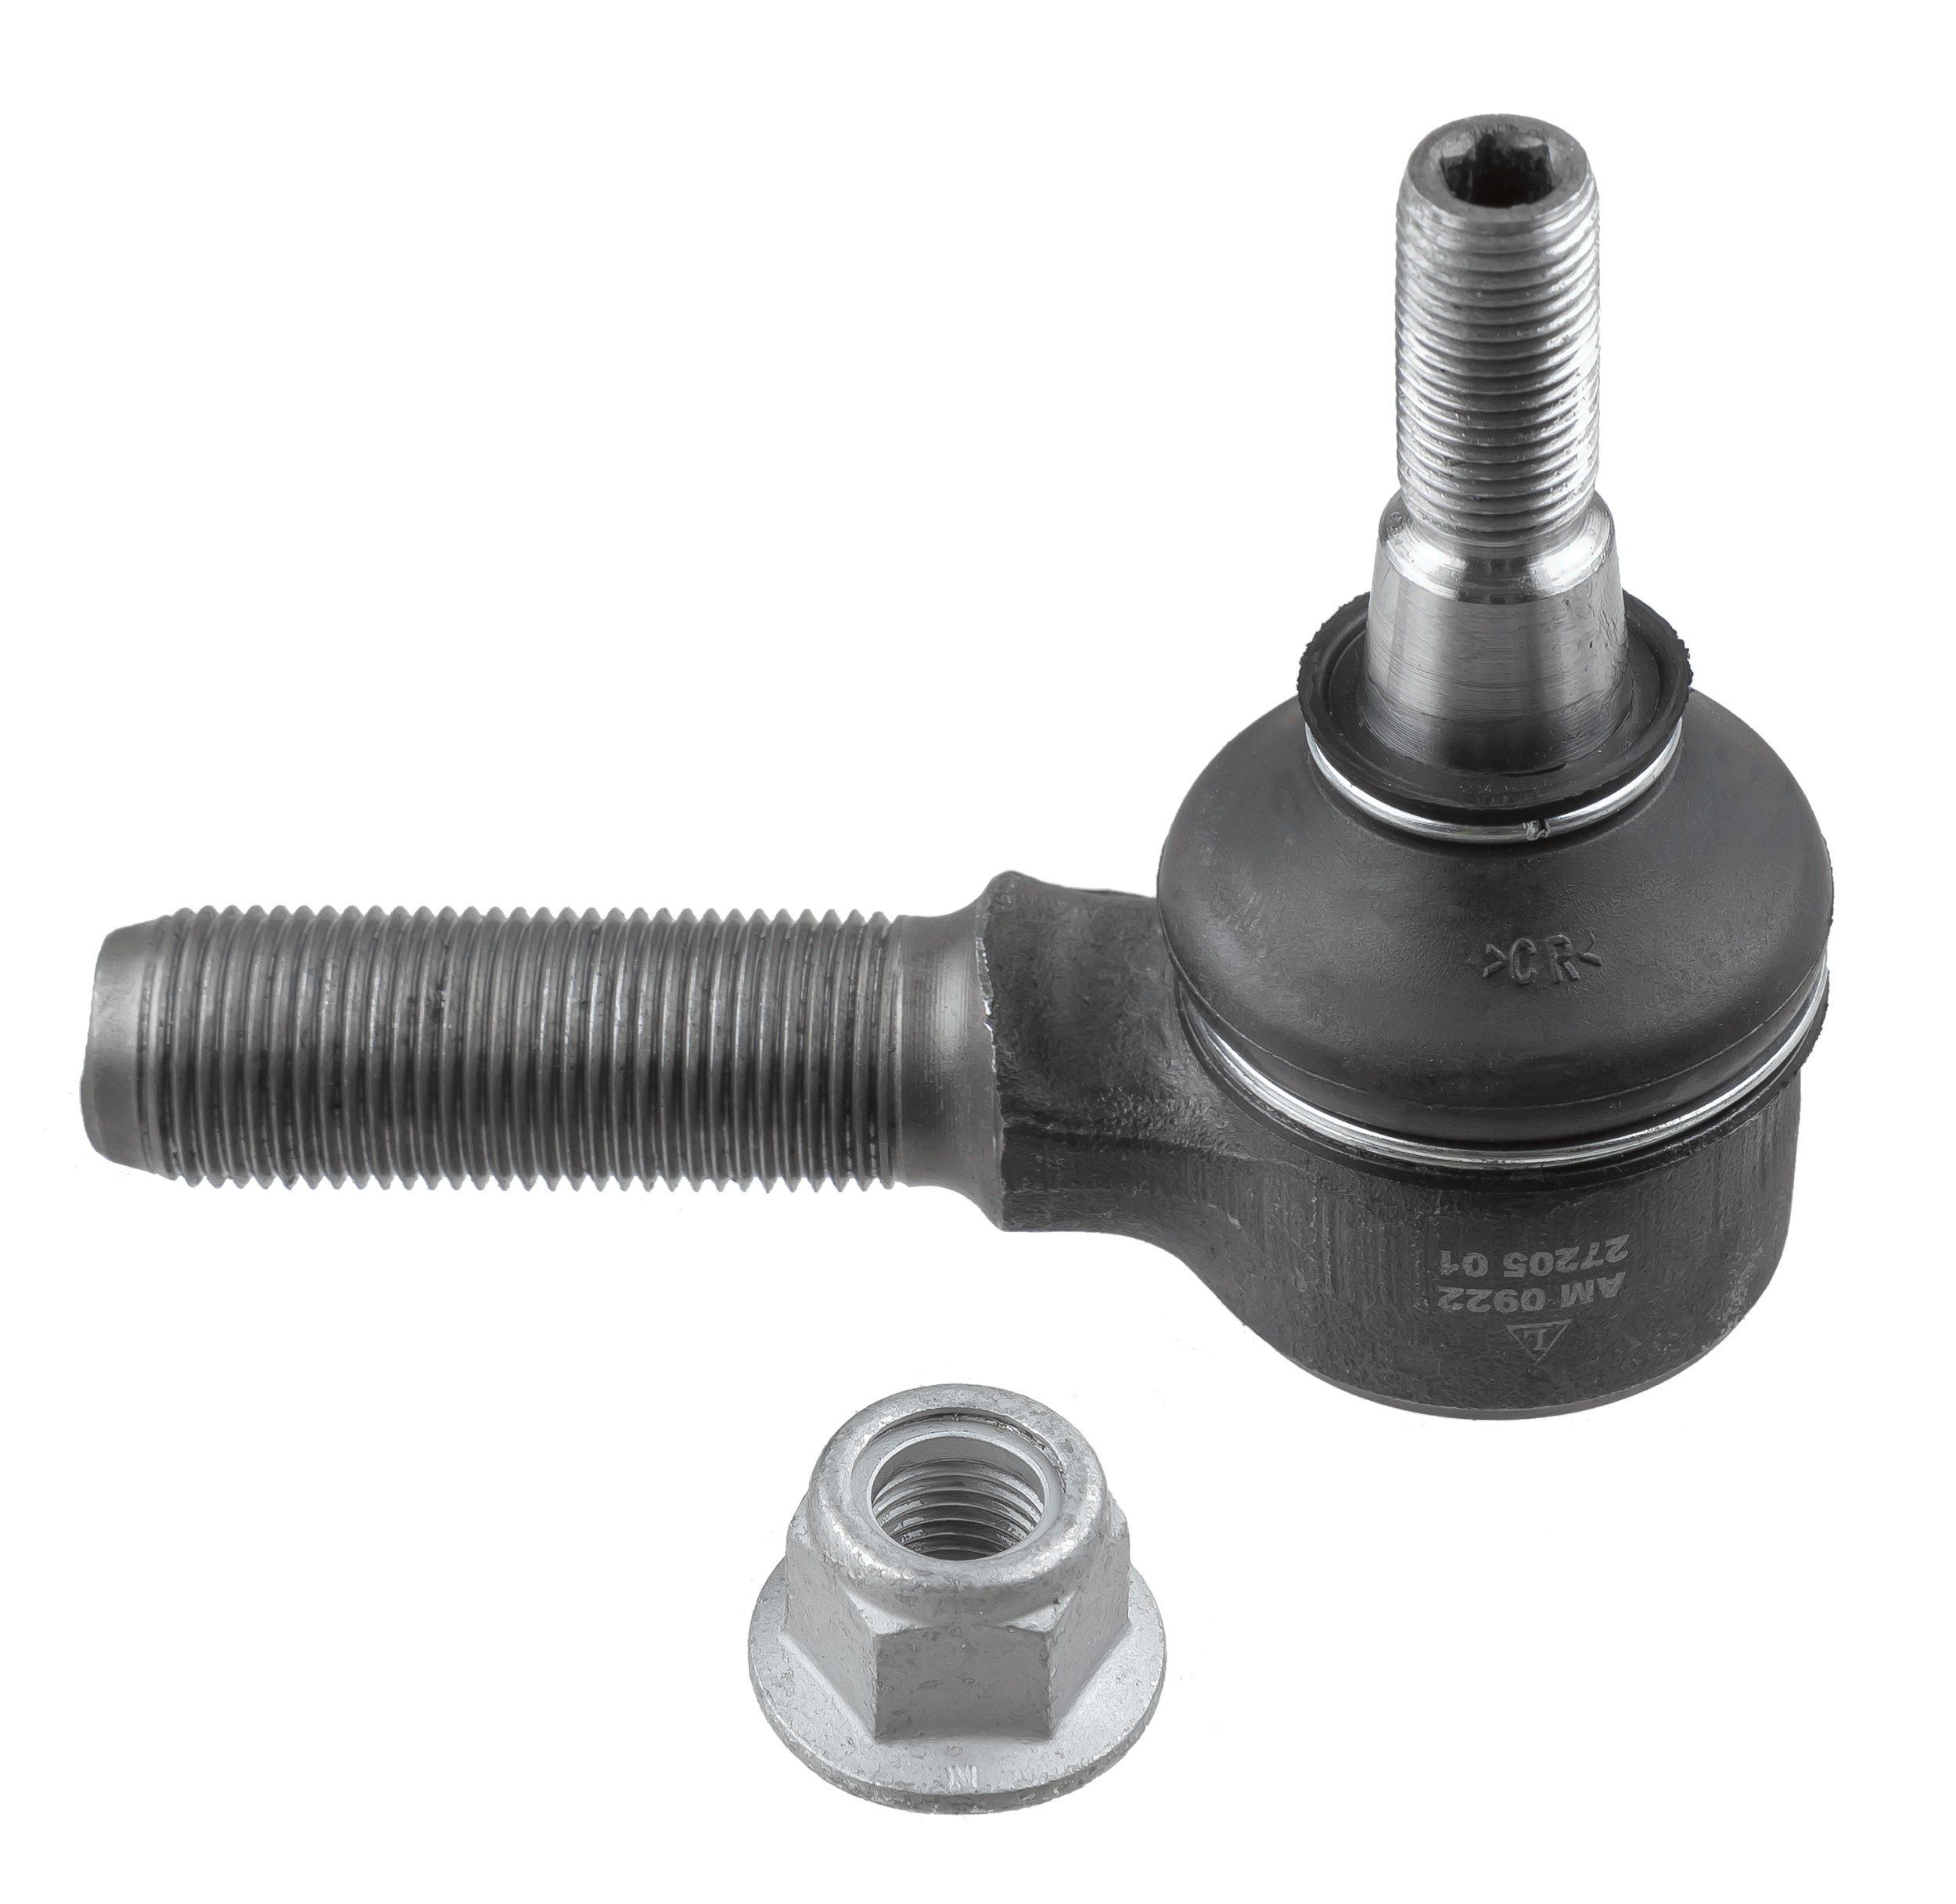 LEMFÖRDER 27205 01 Track rod end Cone Size 17,6 mm, M18x1,5, M12x1,25 mm, Front Axle, both sides, outer